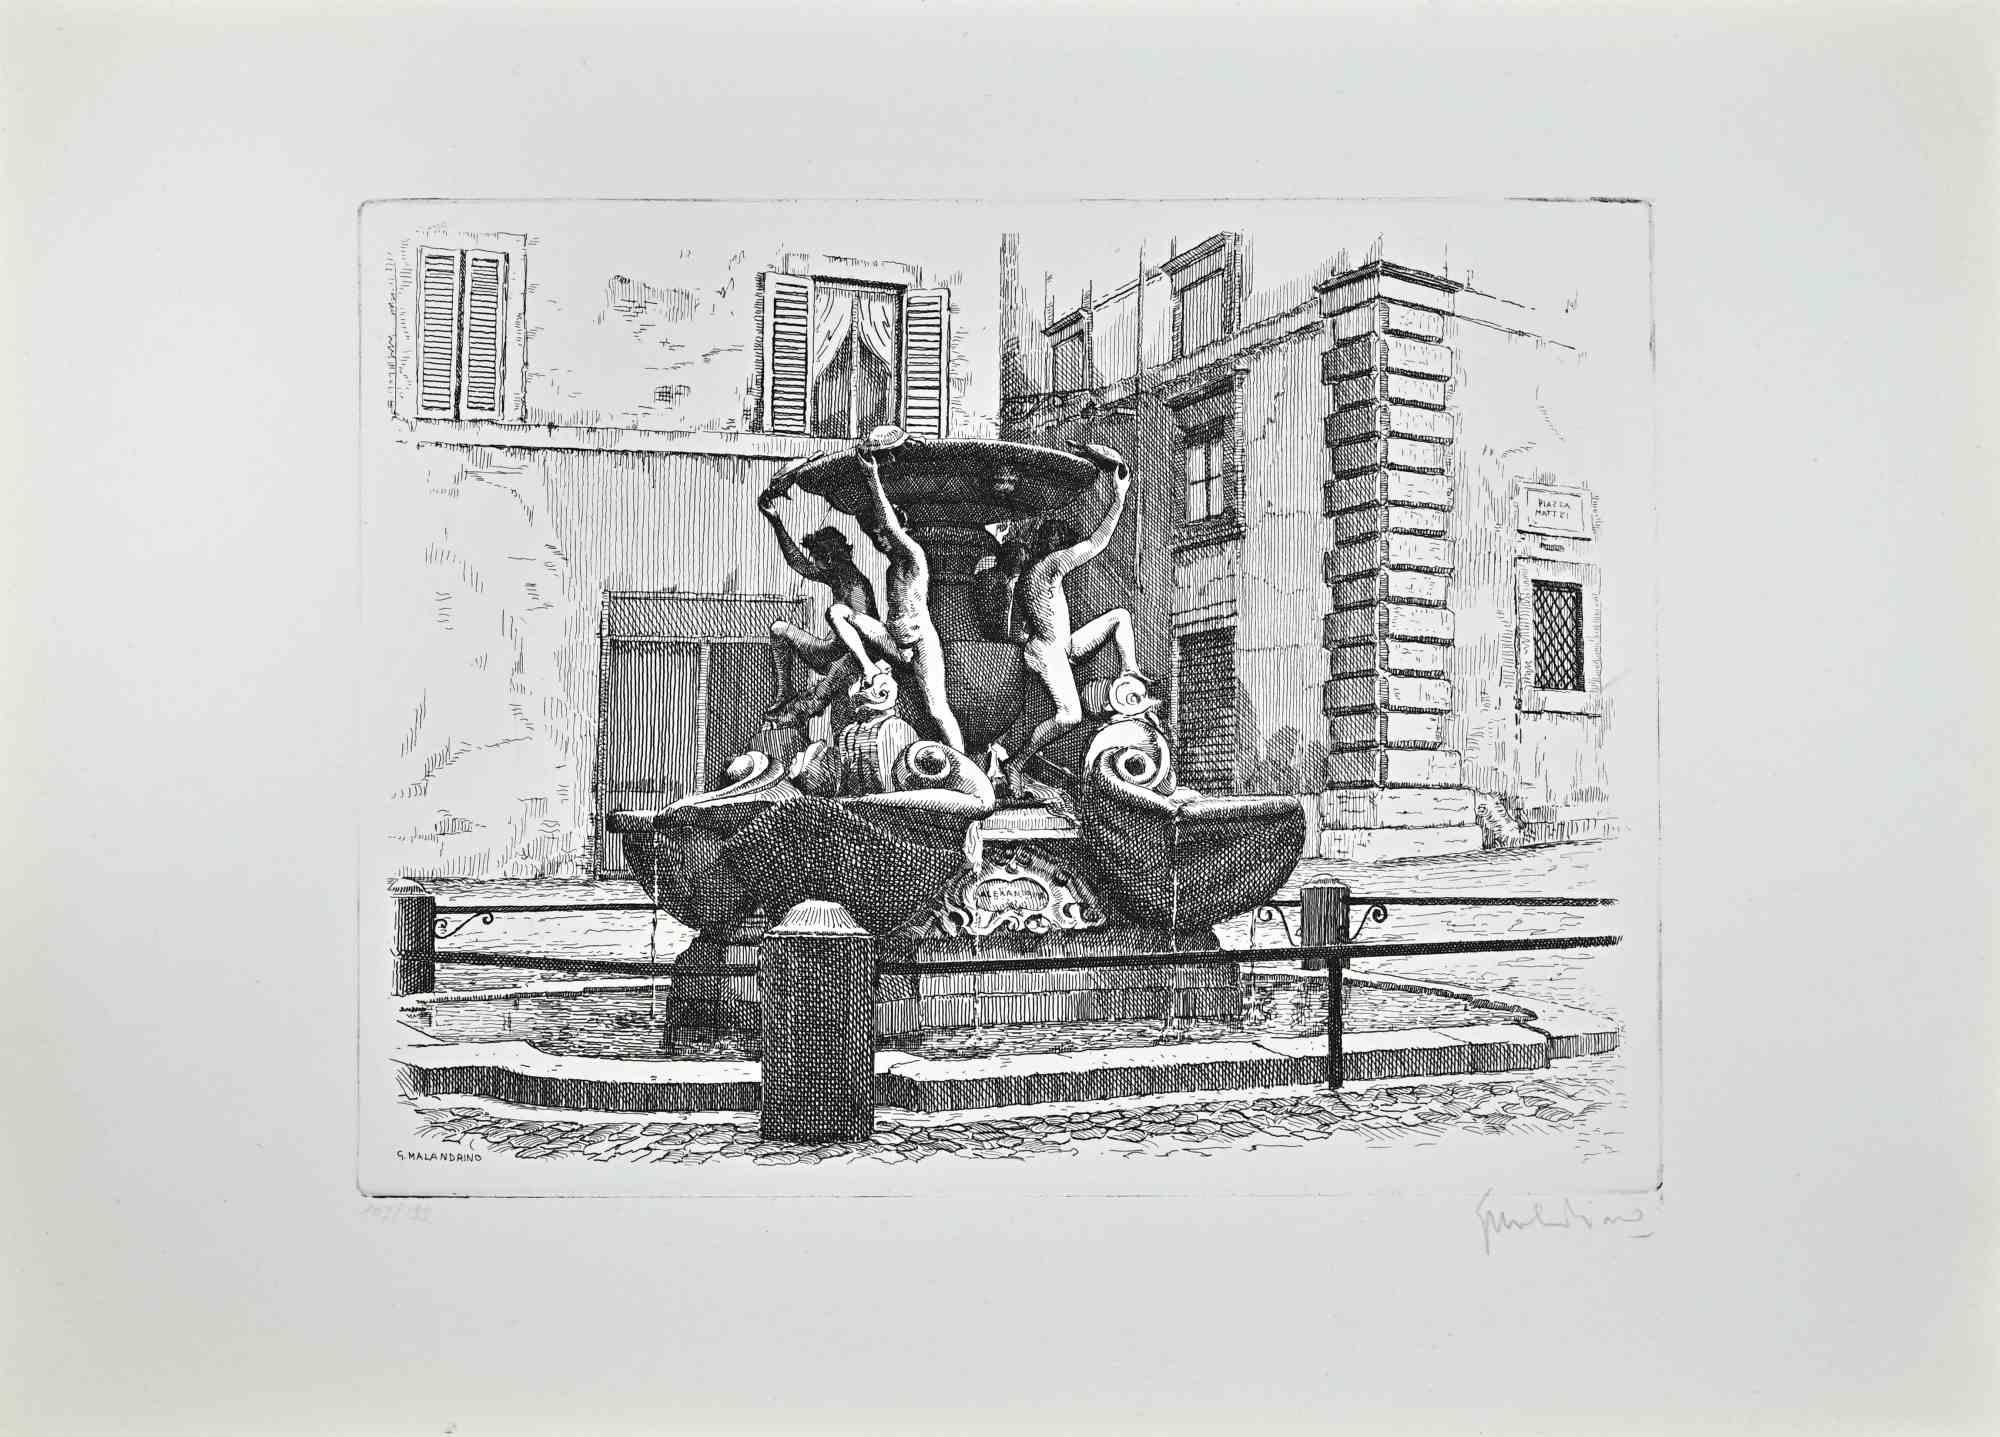 Fountain of the Turtles -Rome is an artwork realized by Giuseppe Malandrino.

Original print in etching technique.

Hand-signed by the artist in pencil on the lower right corner.

Numbered n. 103/199 edition on the lower left corner.

Good